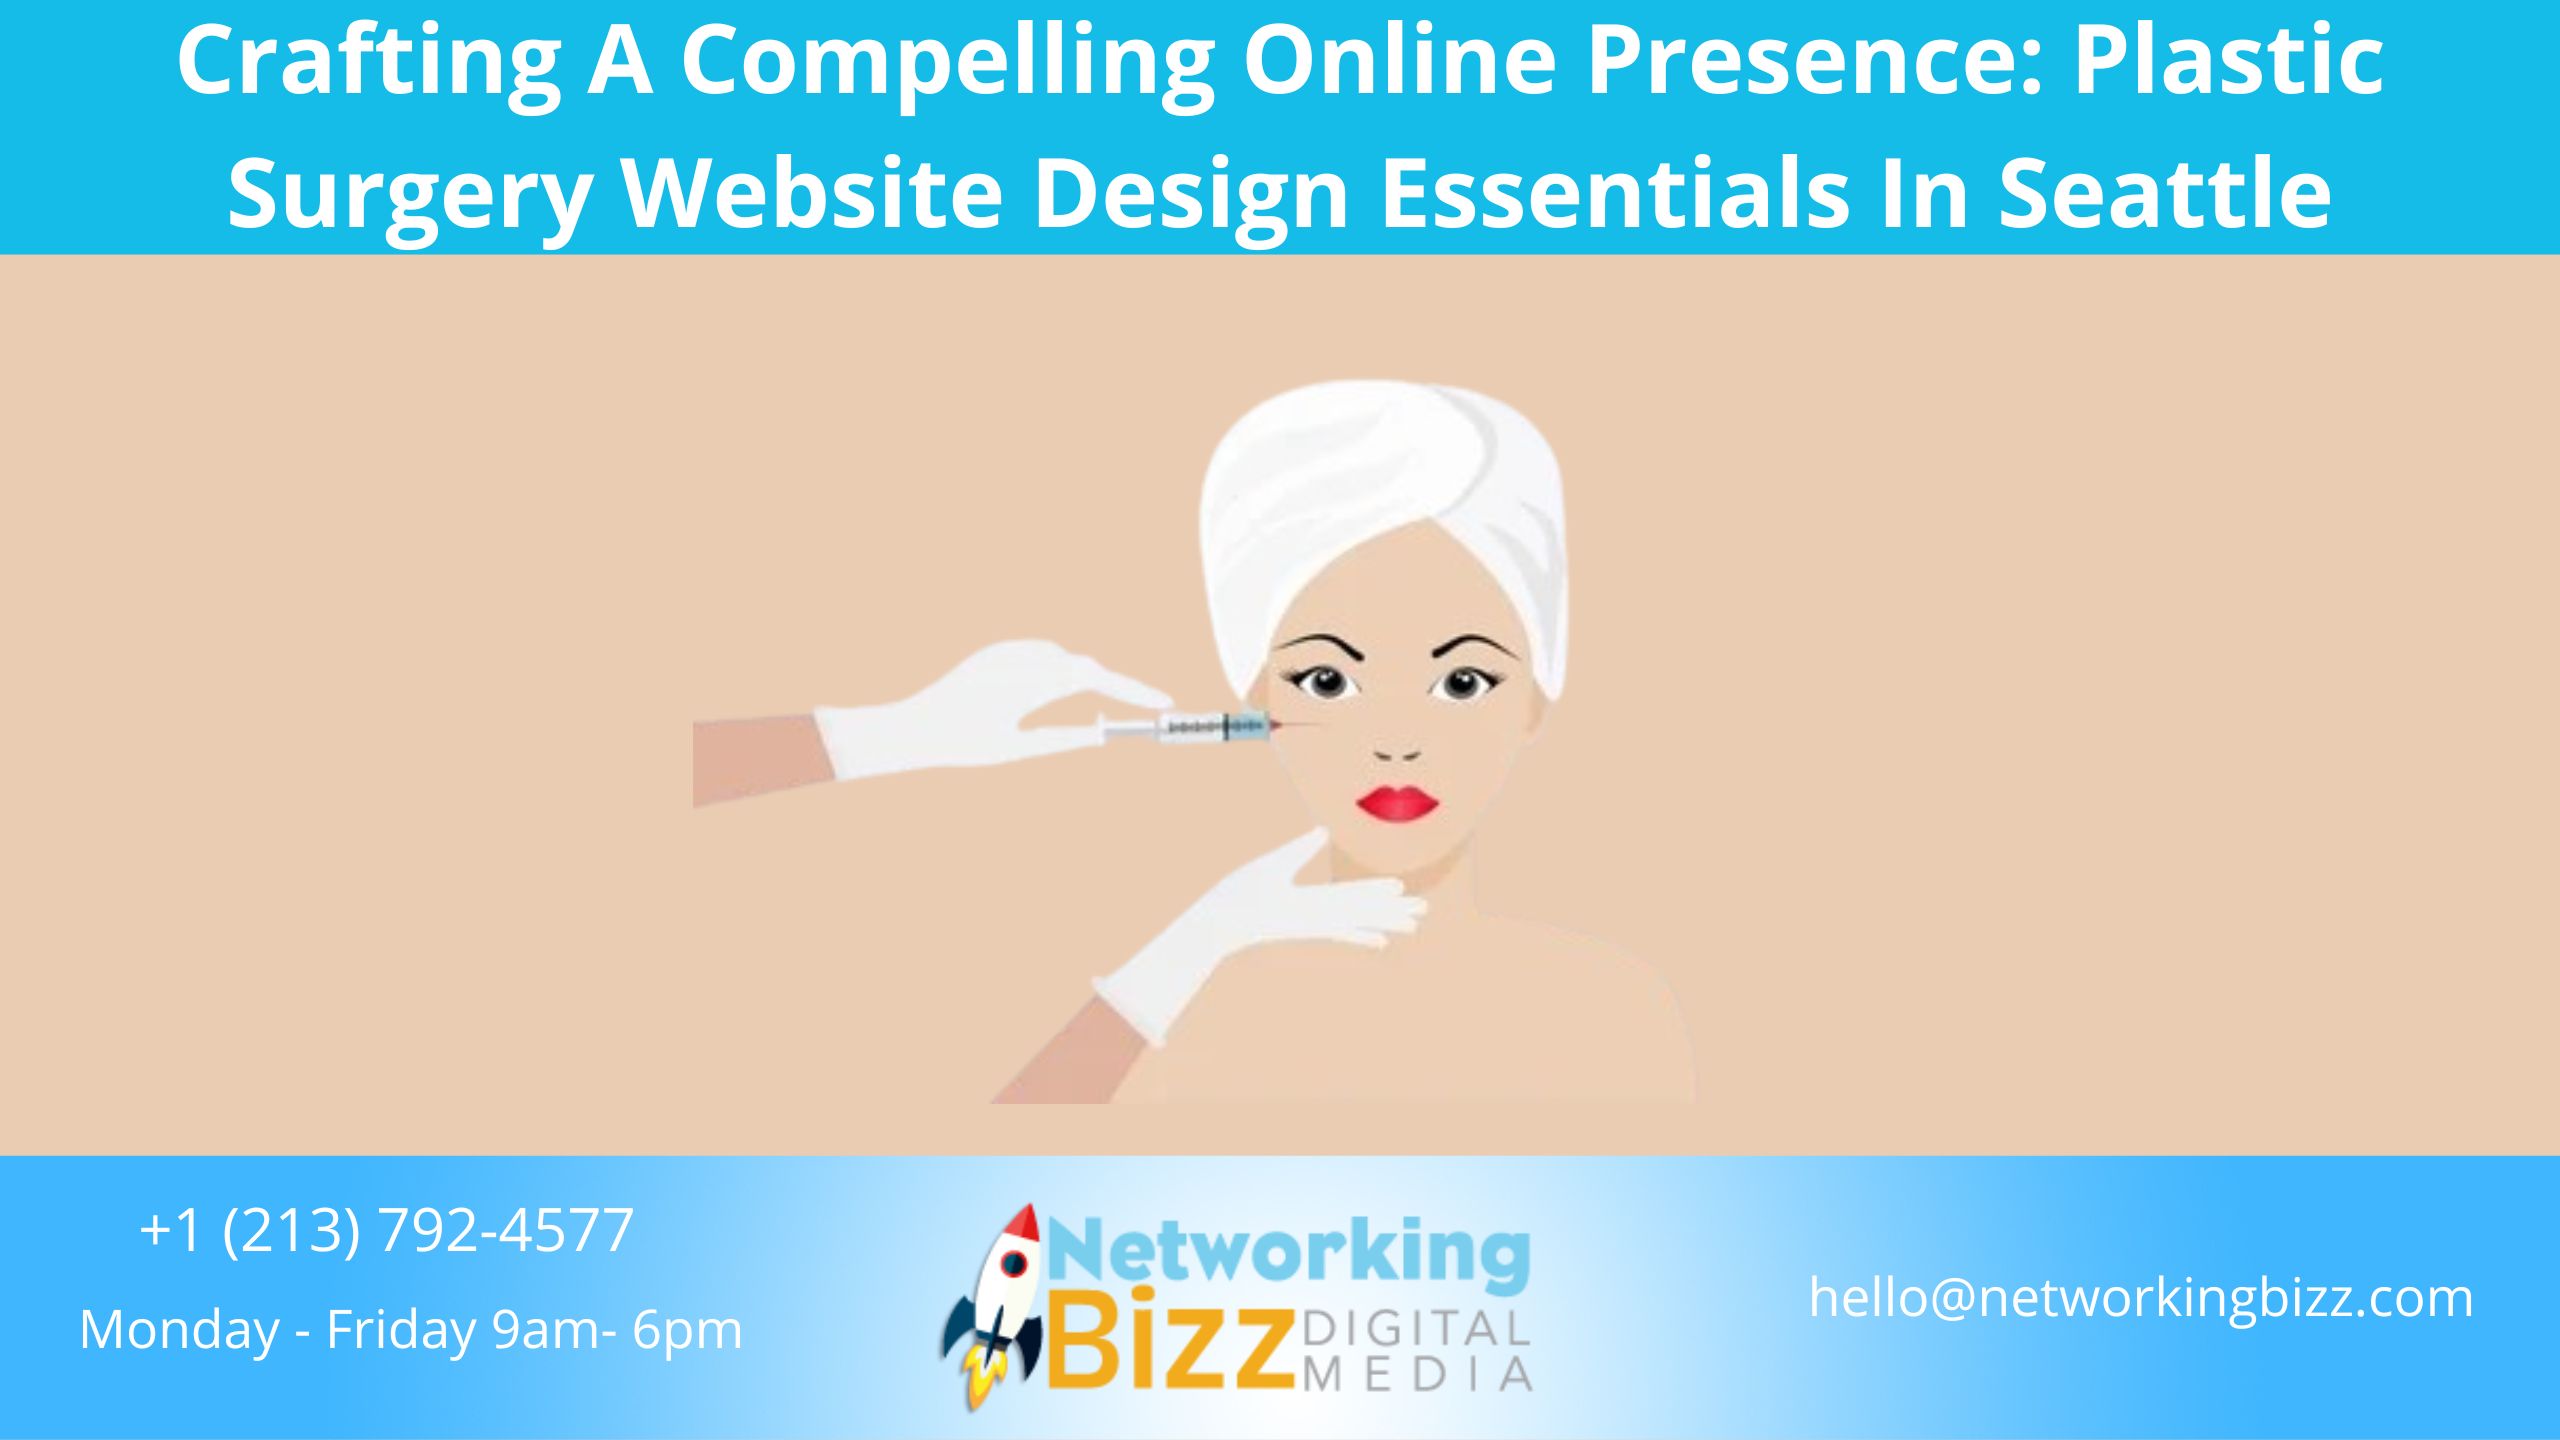 Crafting A Compelling Online Presence: Plastic Surgery Website Design Essentials In Seattle